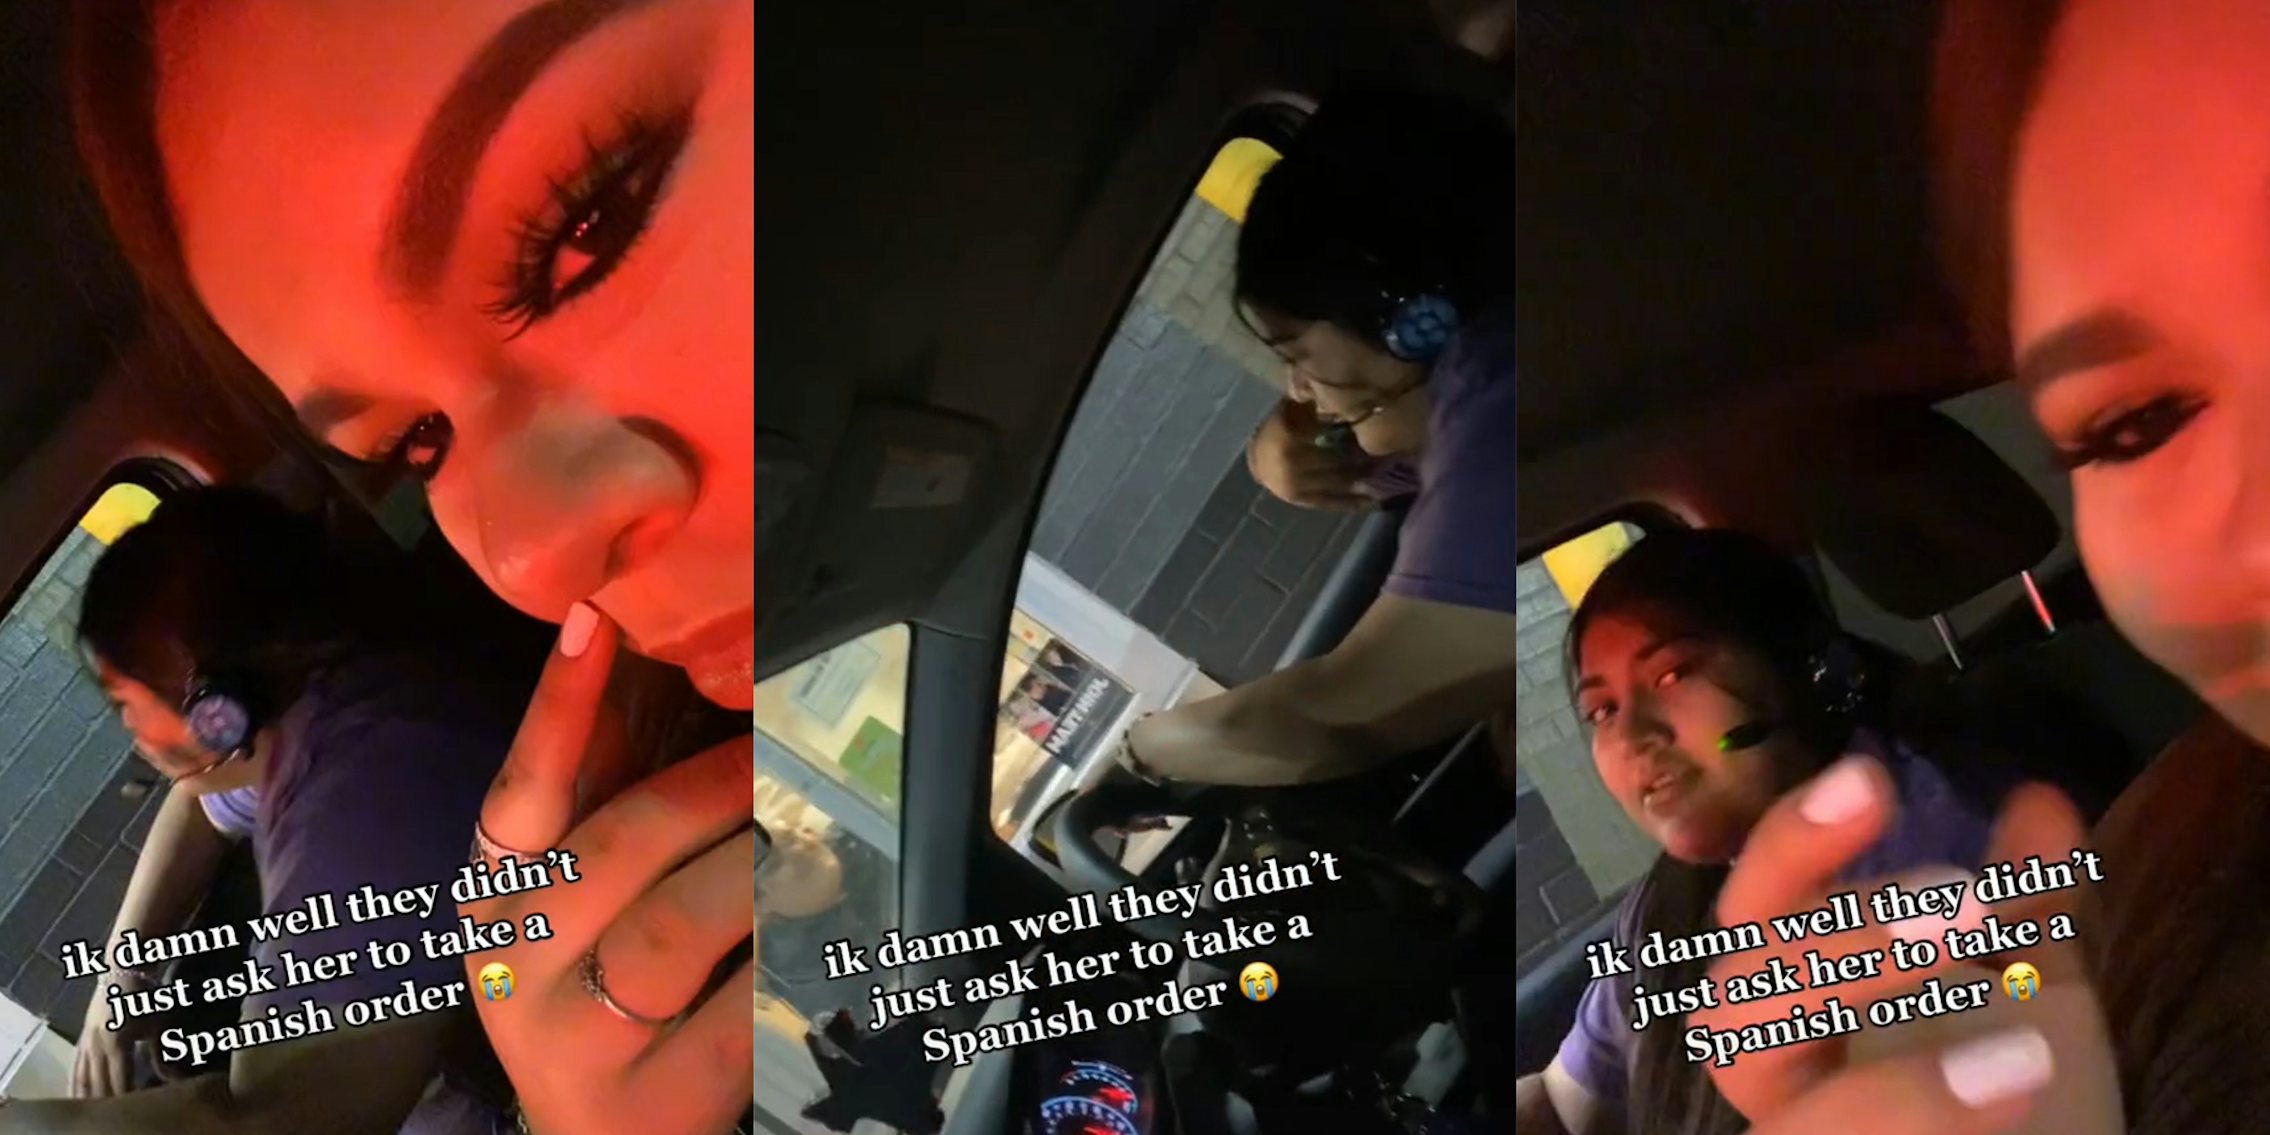 two young women in McDonald's drive thru, driver wearing headset taking an order, all with caption 'ik damn well they didn't just ask her to take a Spanish order'